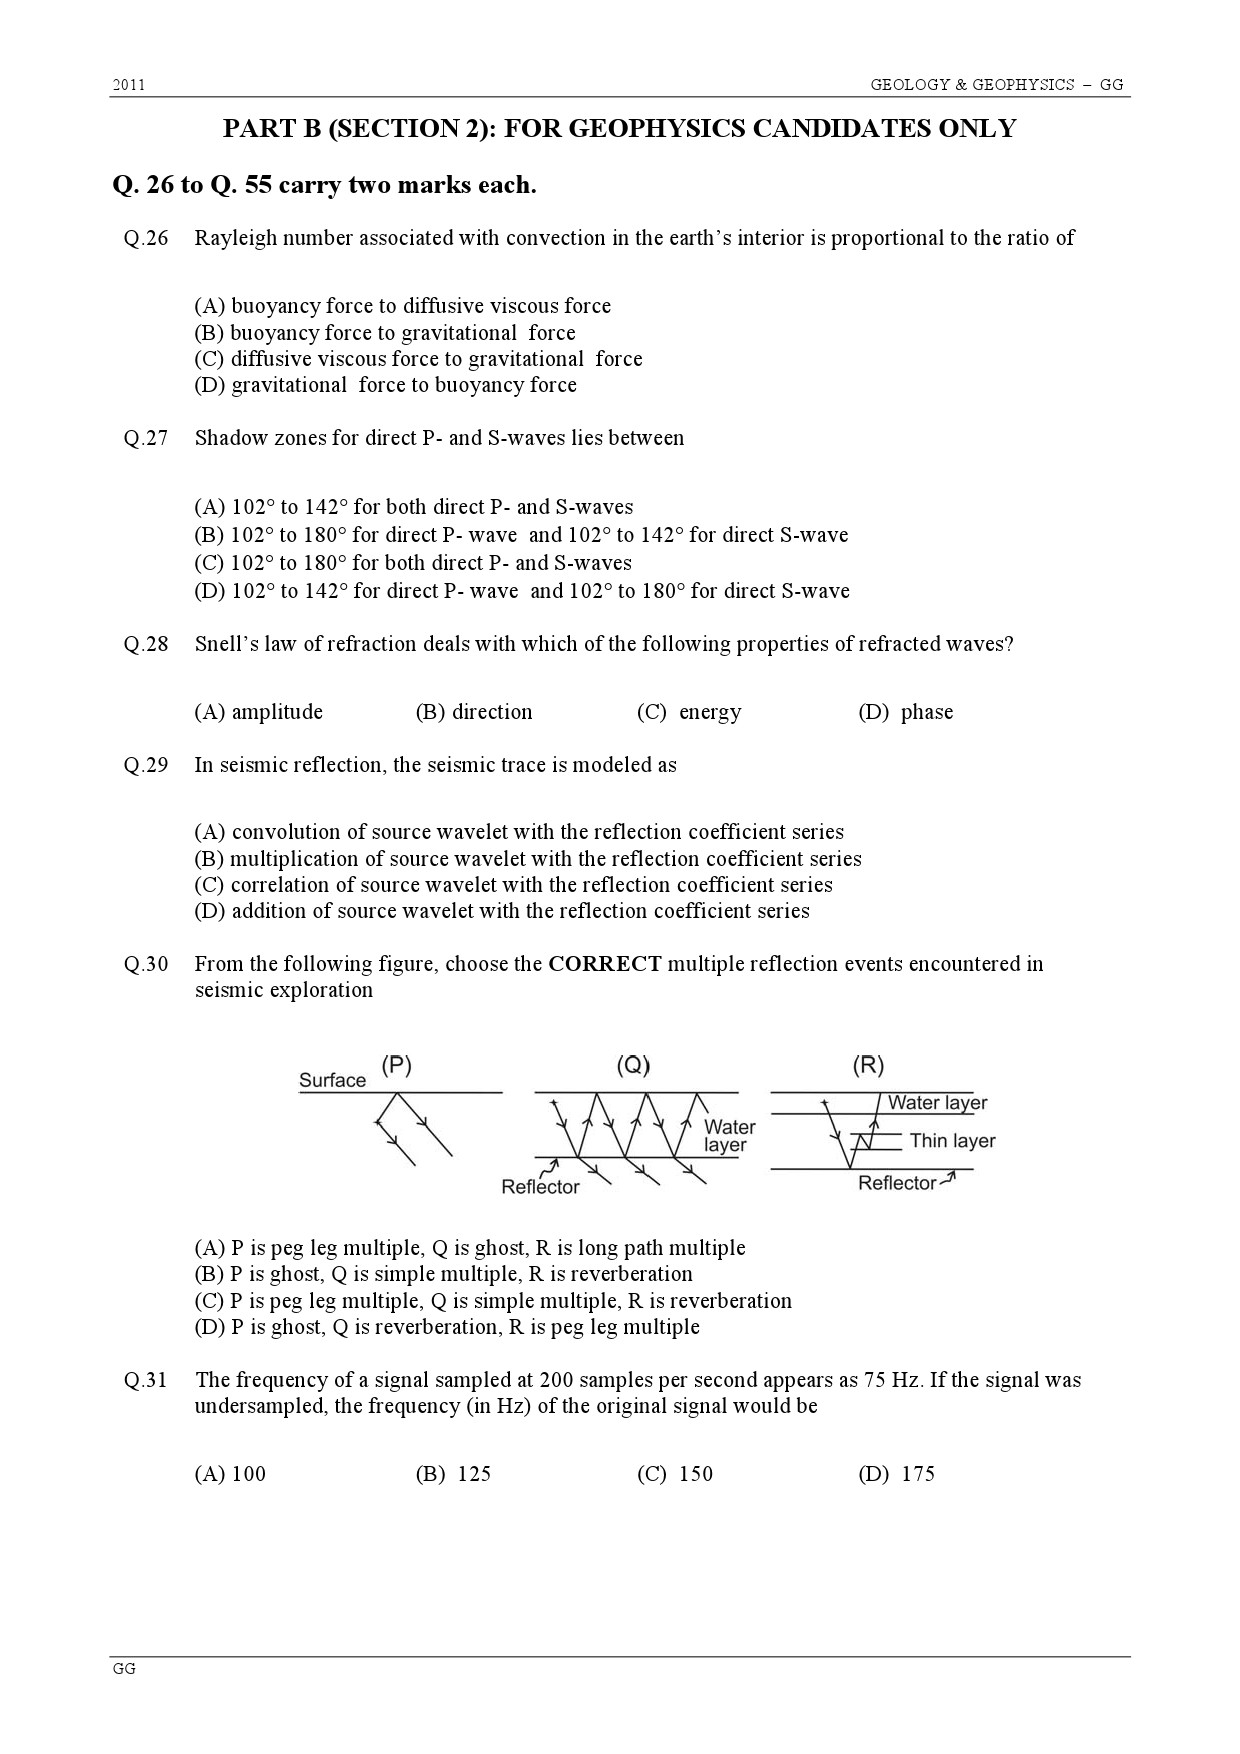 GATE Exam Question Paper 2011 Geology and Geophysics 11